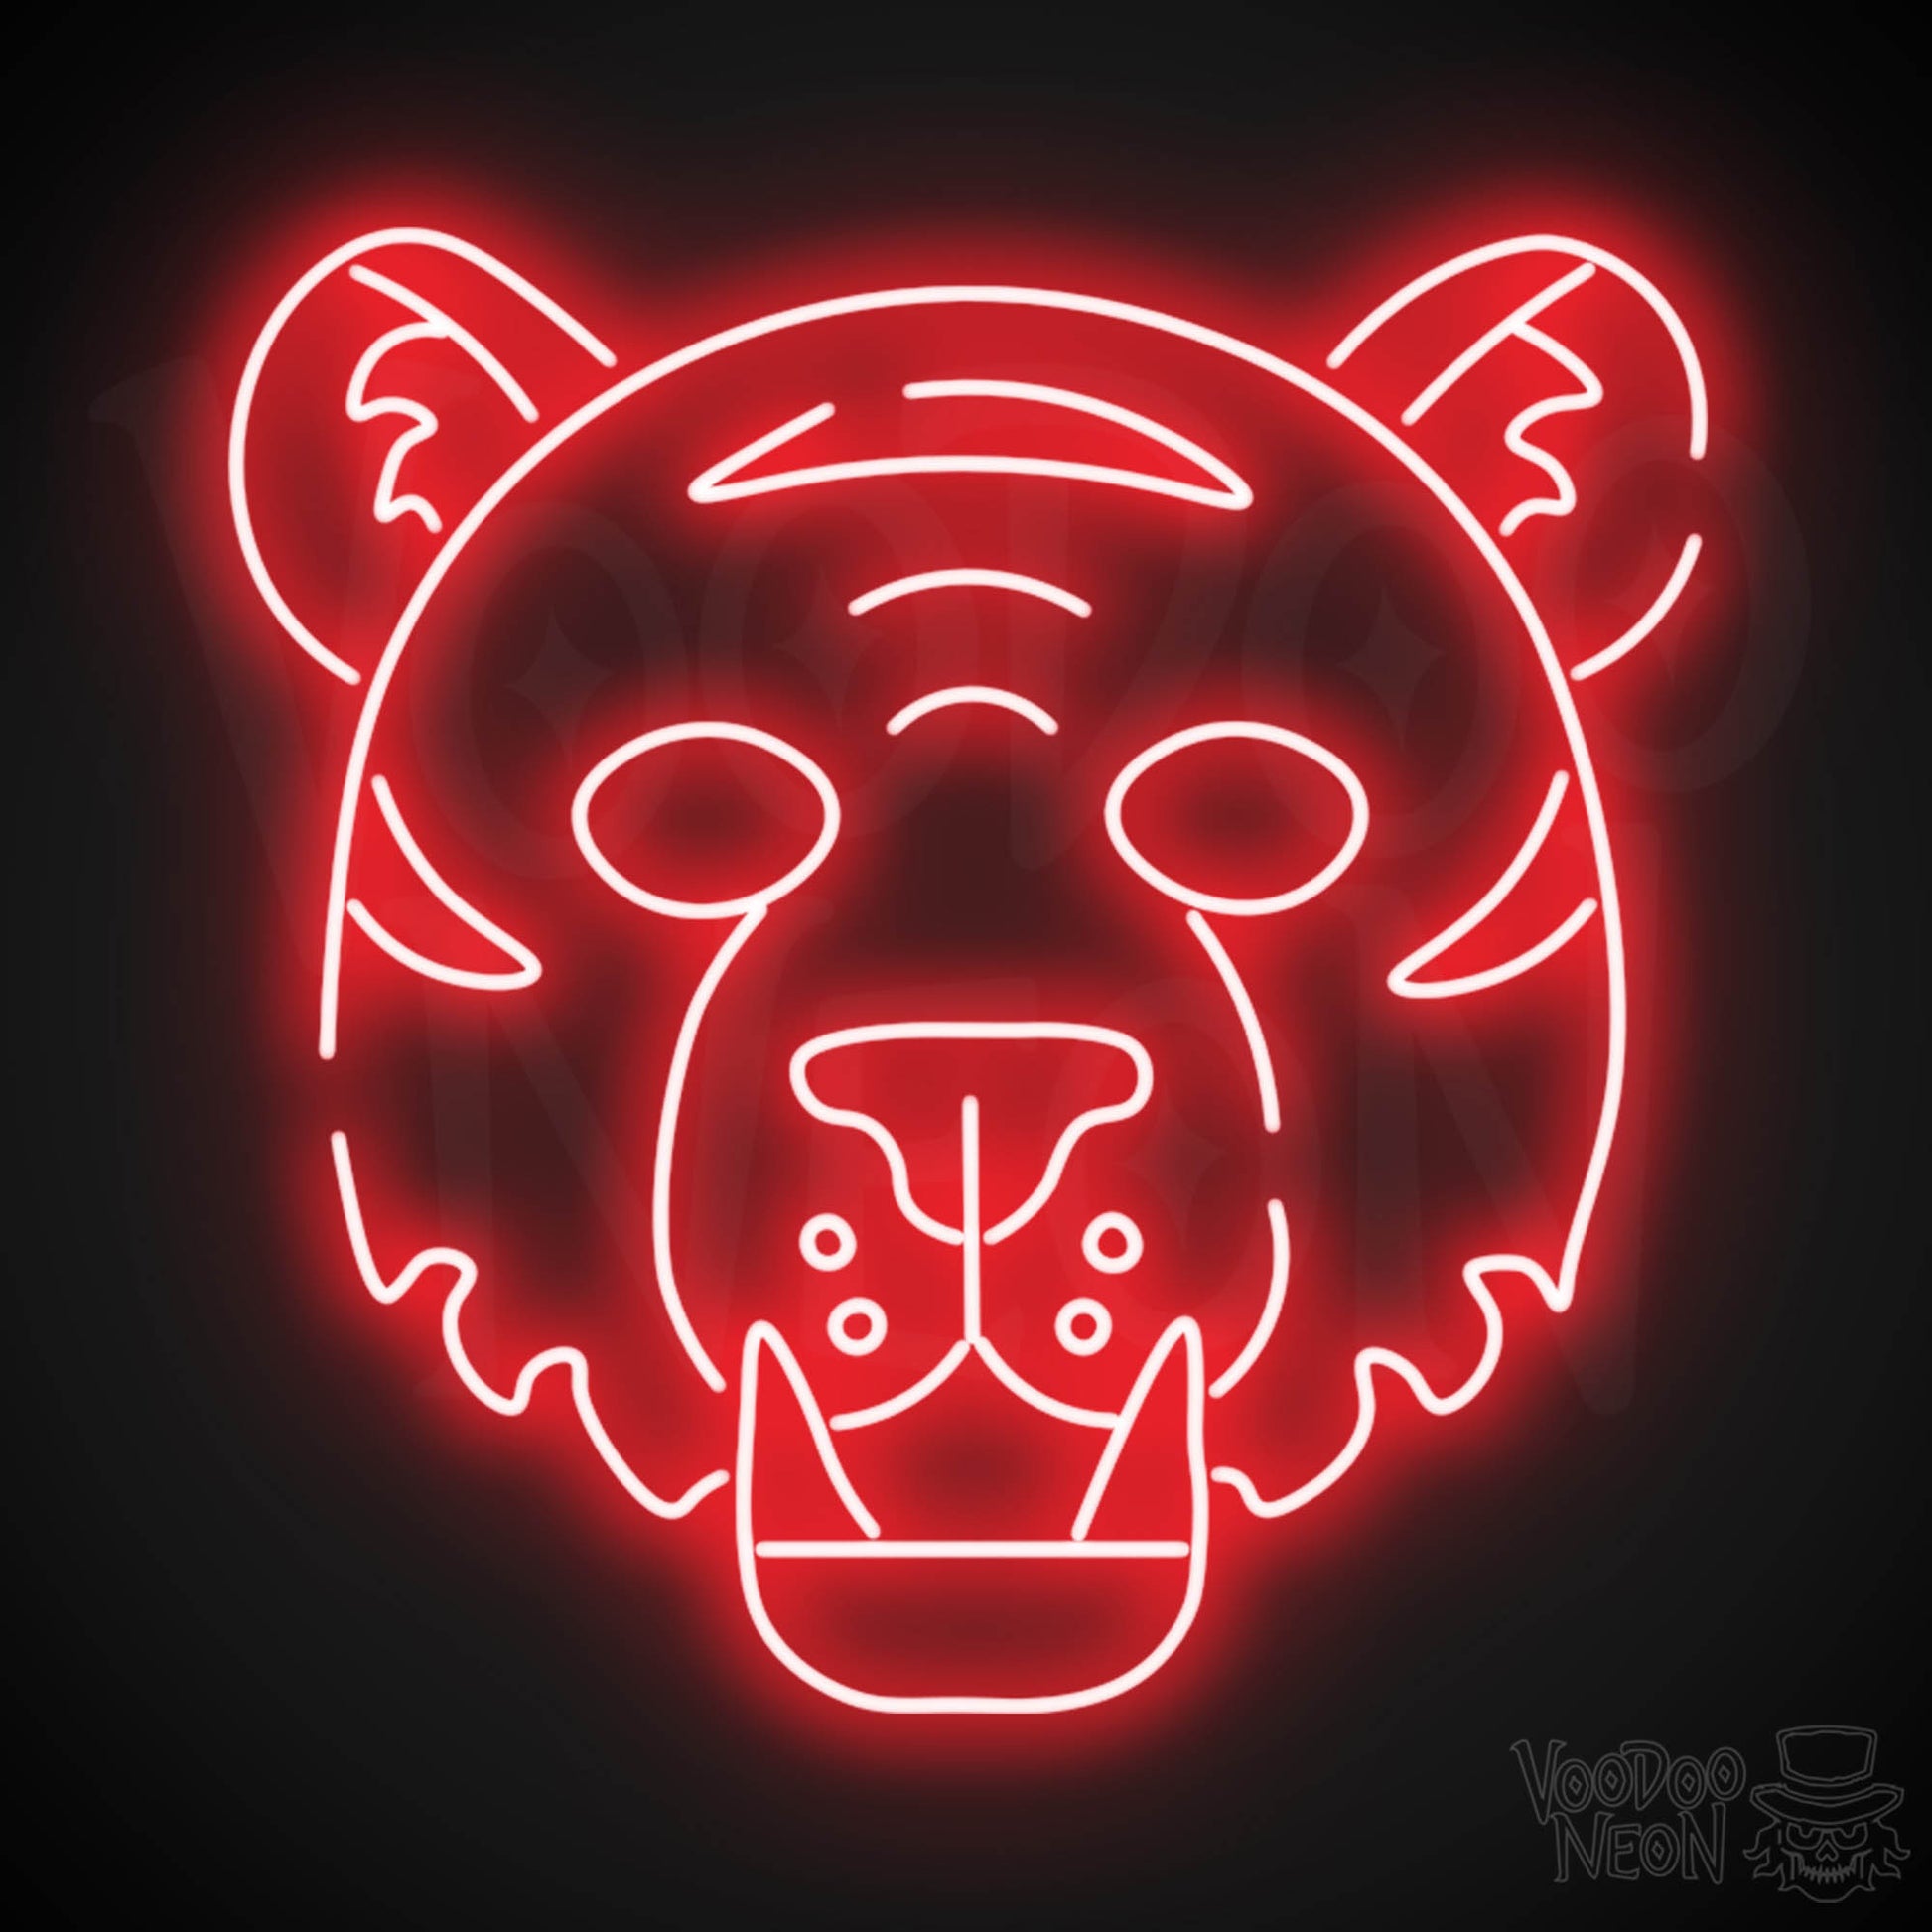 Neon Tiger Wall Art - Neon Tiger Sign - Tiger Neon Sign - LED Sign - Color Red